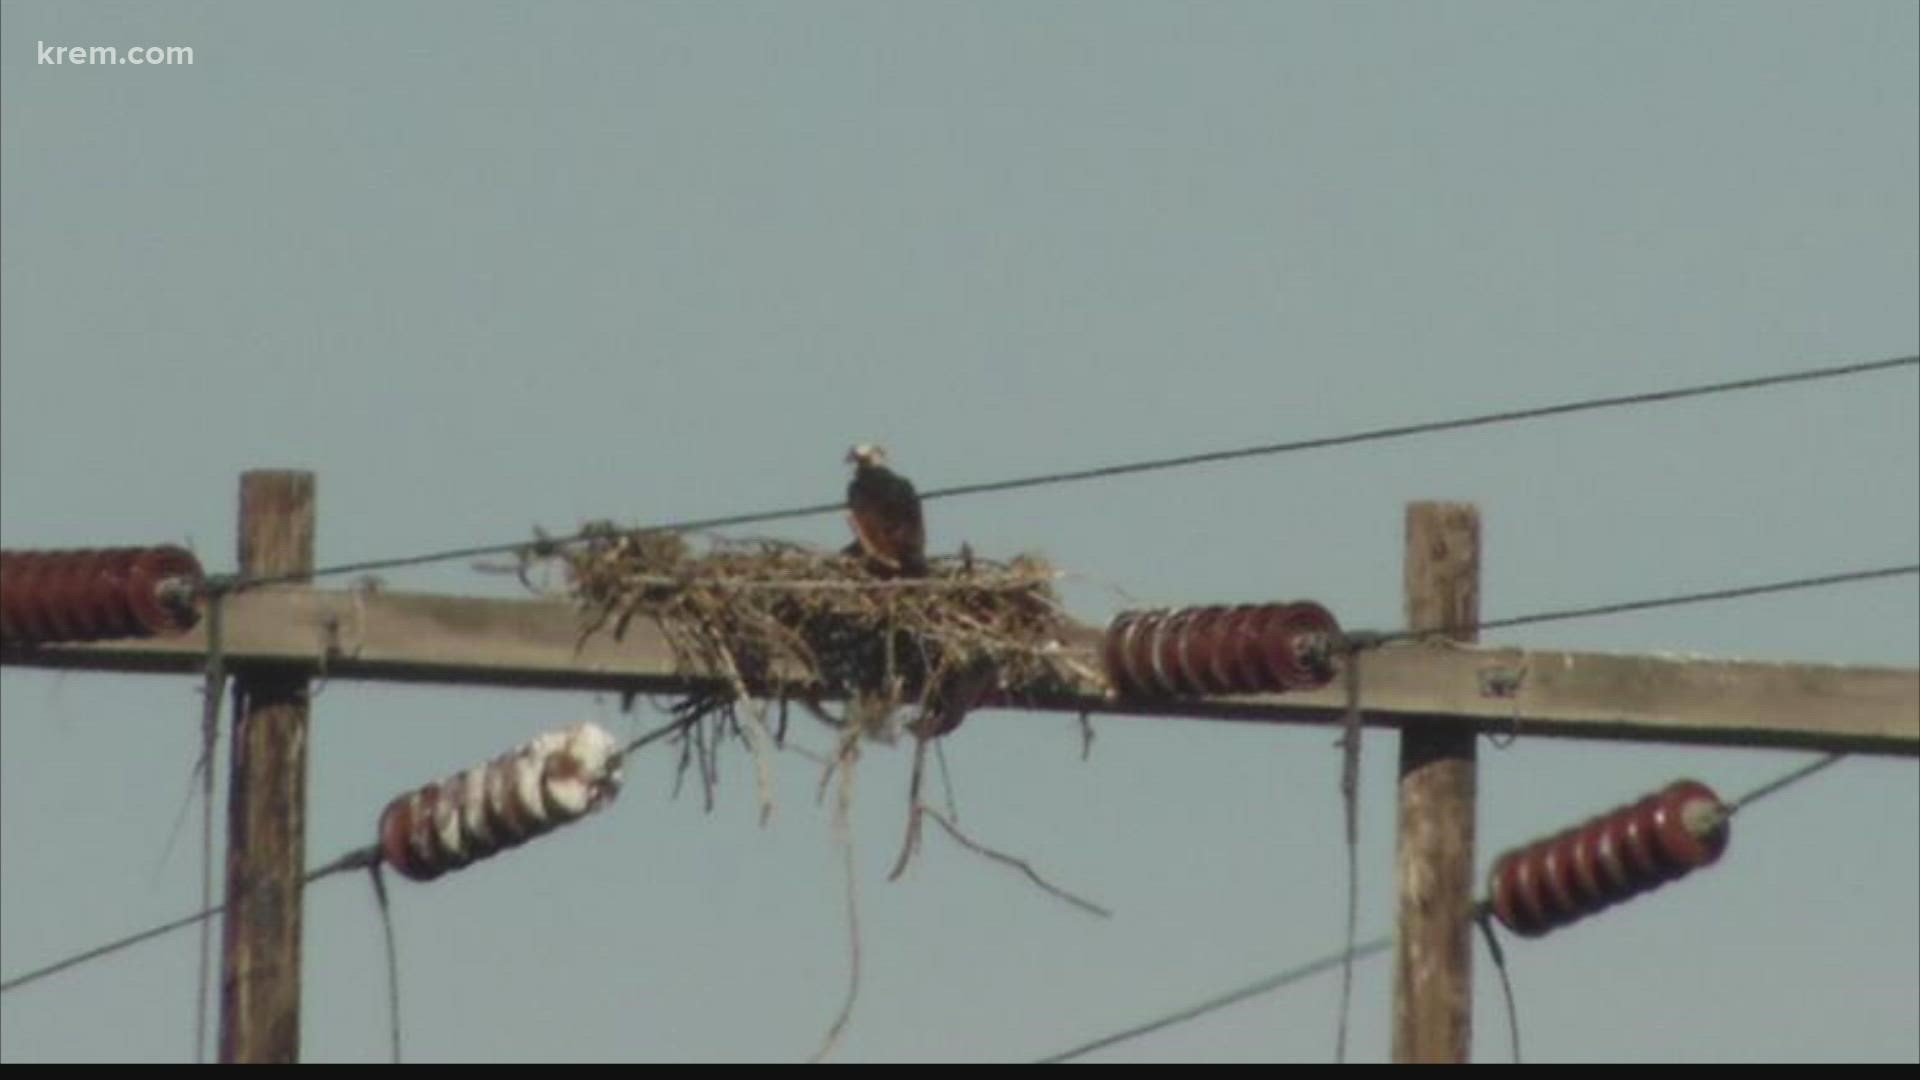 Bonneville Power Administration will be removing an ospreys nest on a high voltage transmission line power pole.